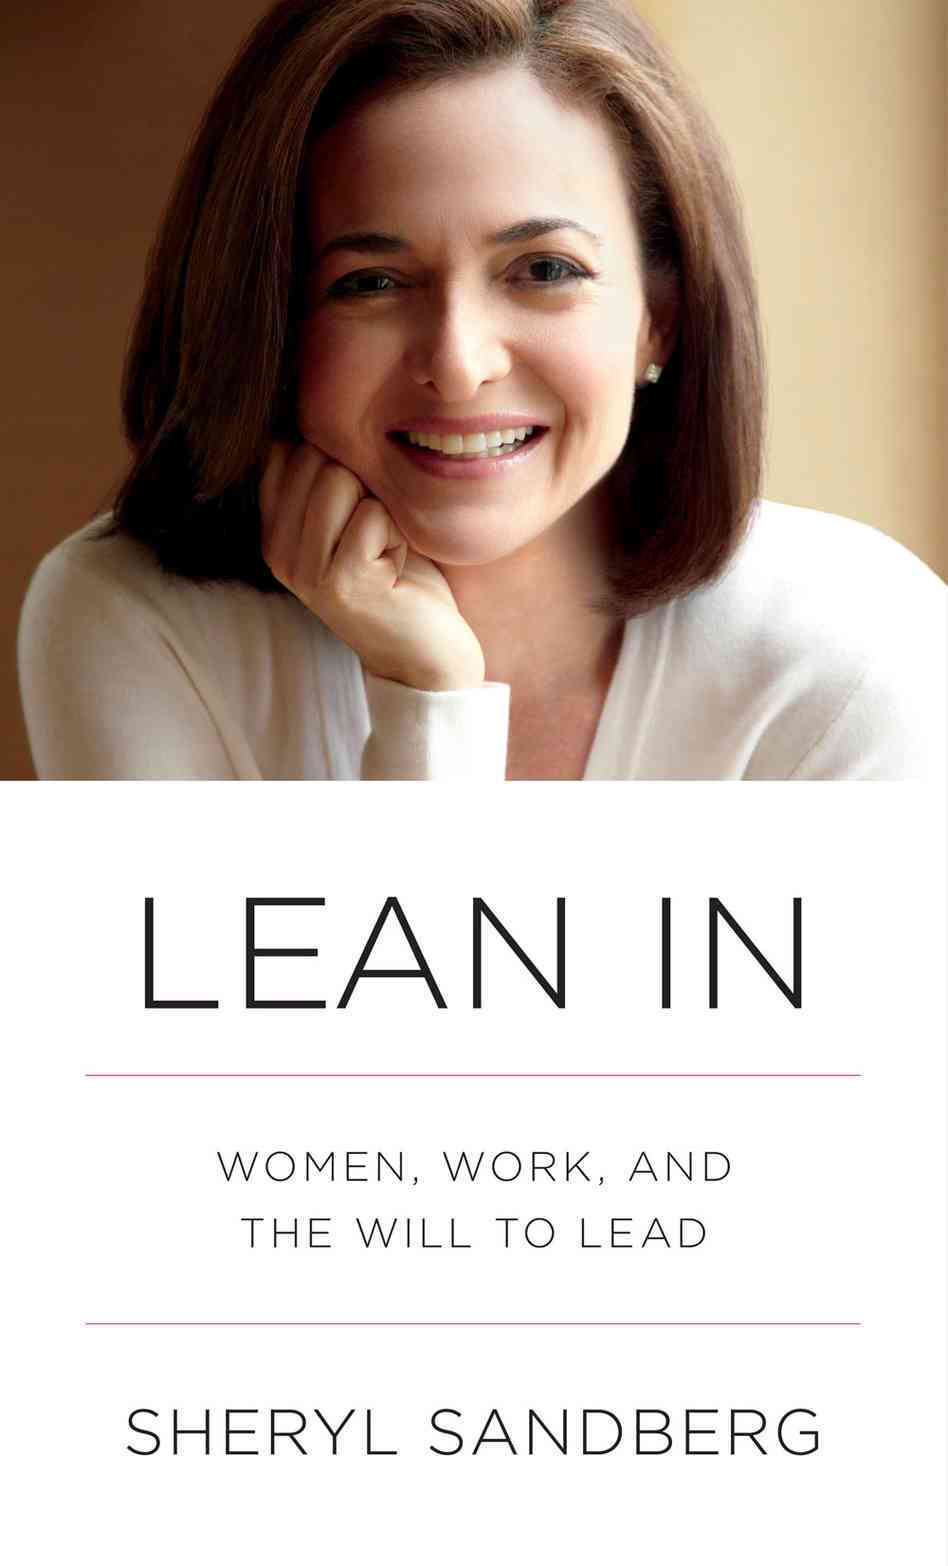 lean-in-book-review Self Love Beauty